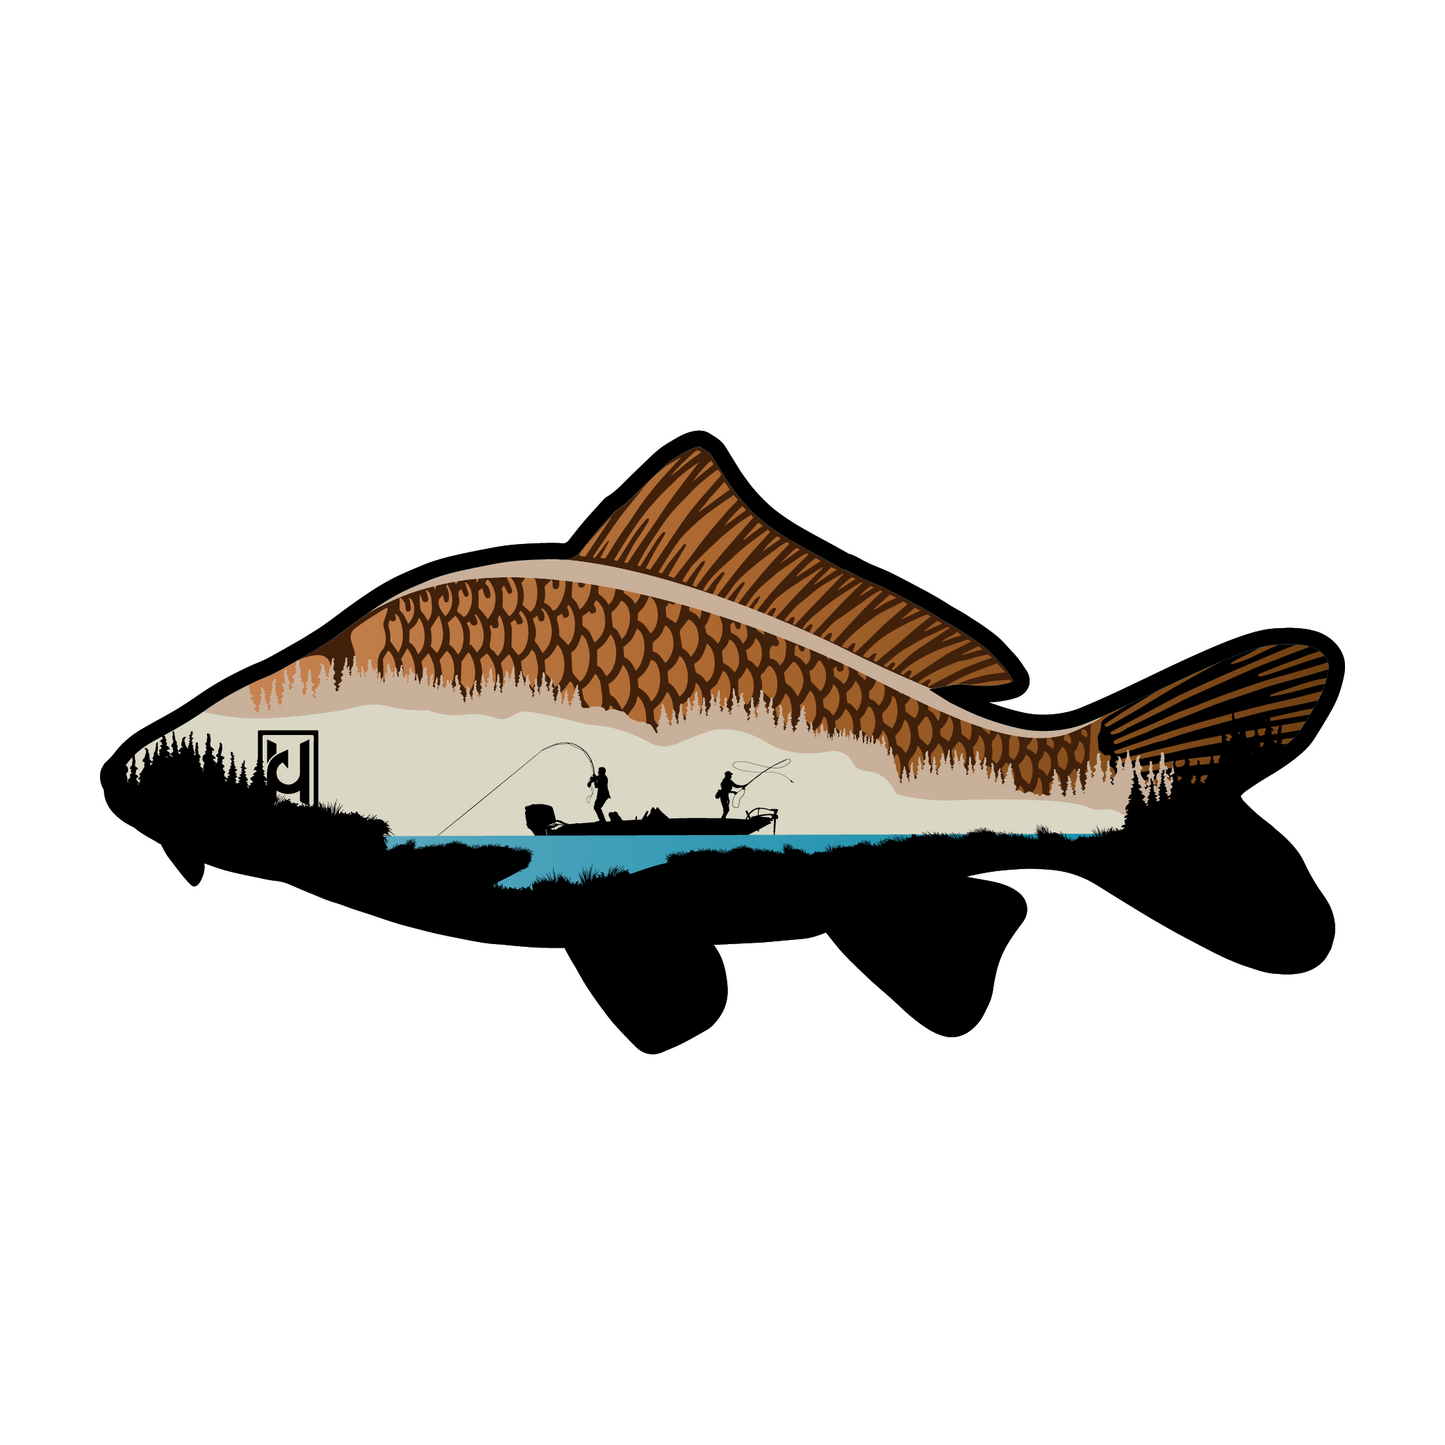 Carp sticker modeled after our wood art! Includes the beautiful features of the Carp along with a boat fishing scene with two anglers out enjoying the water.